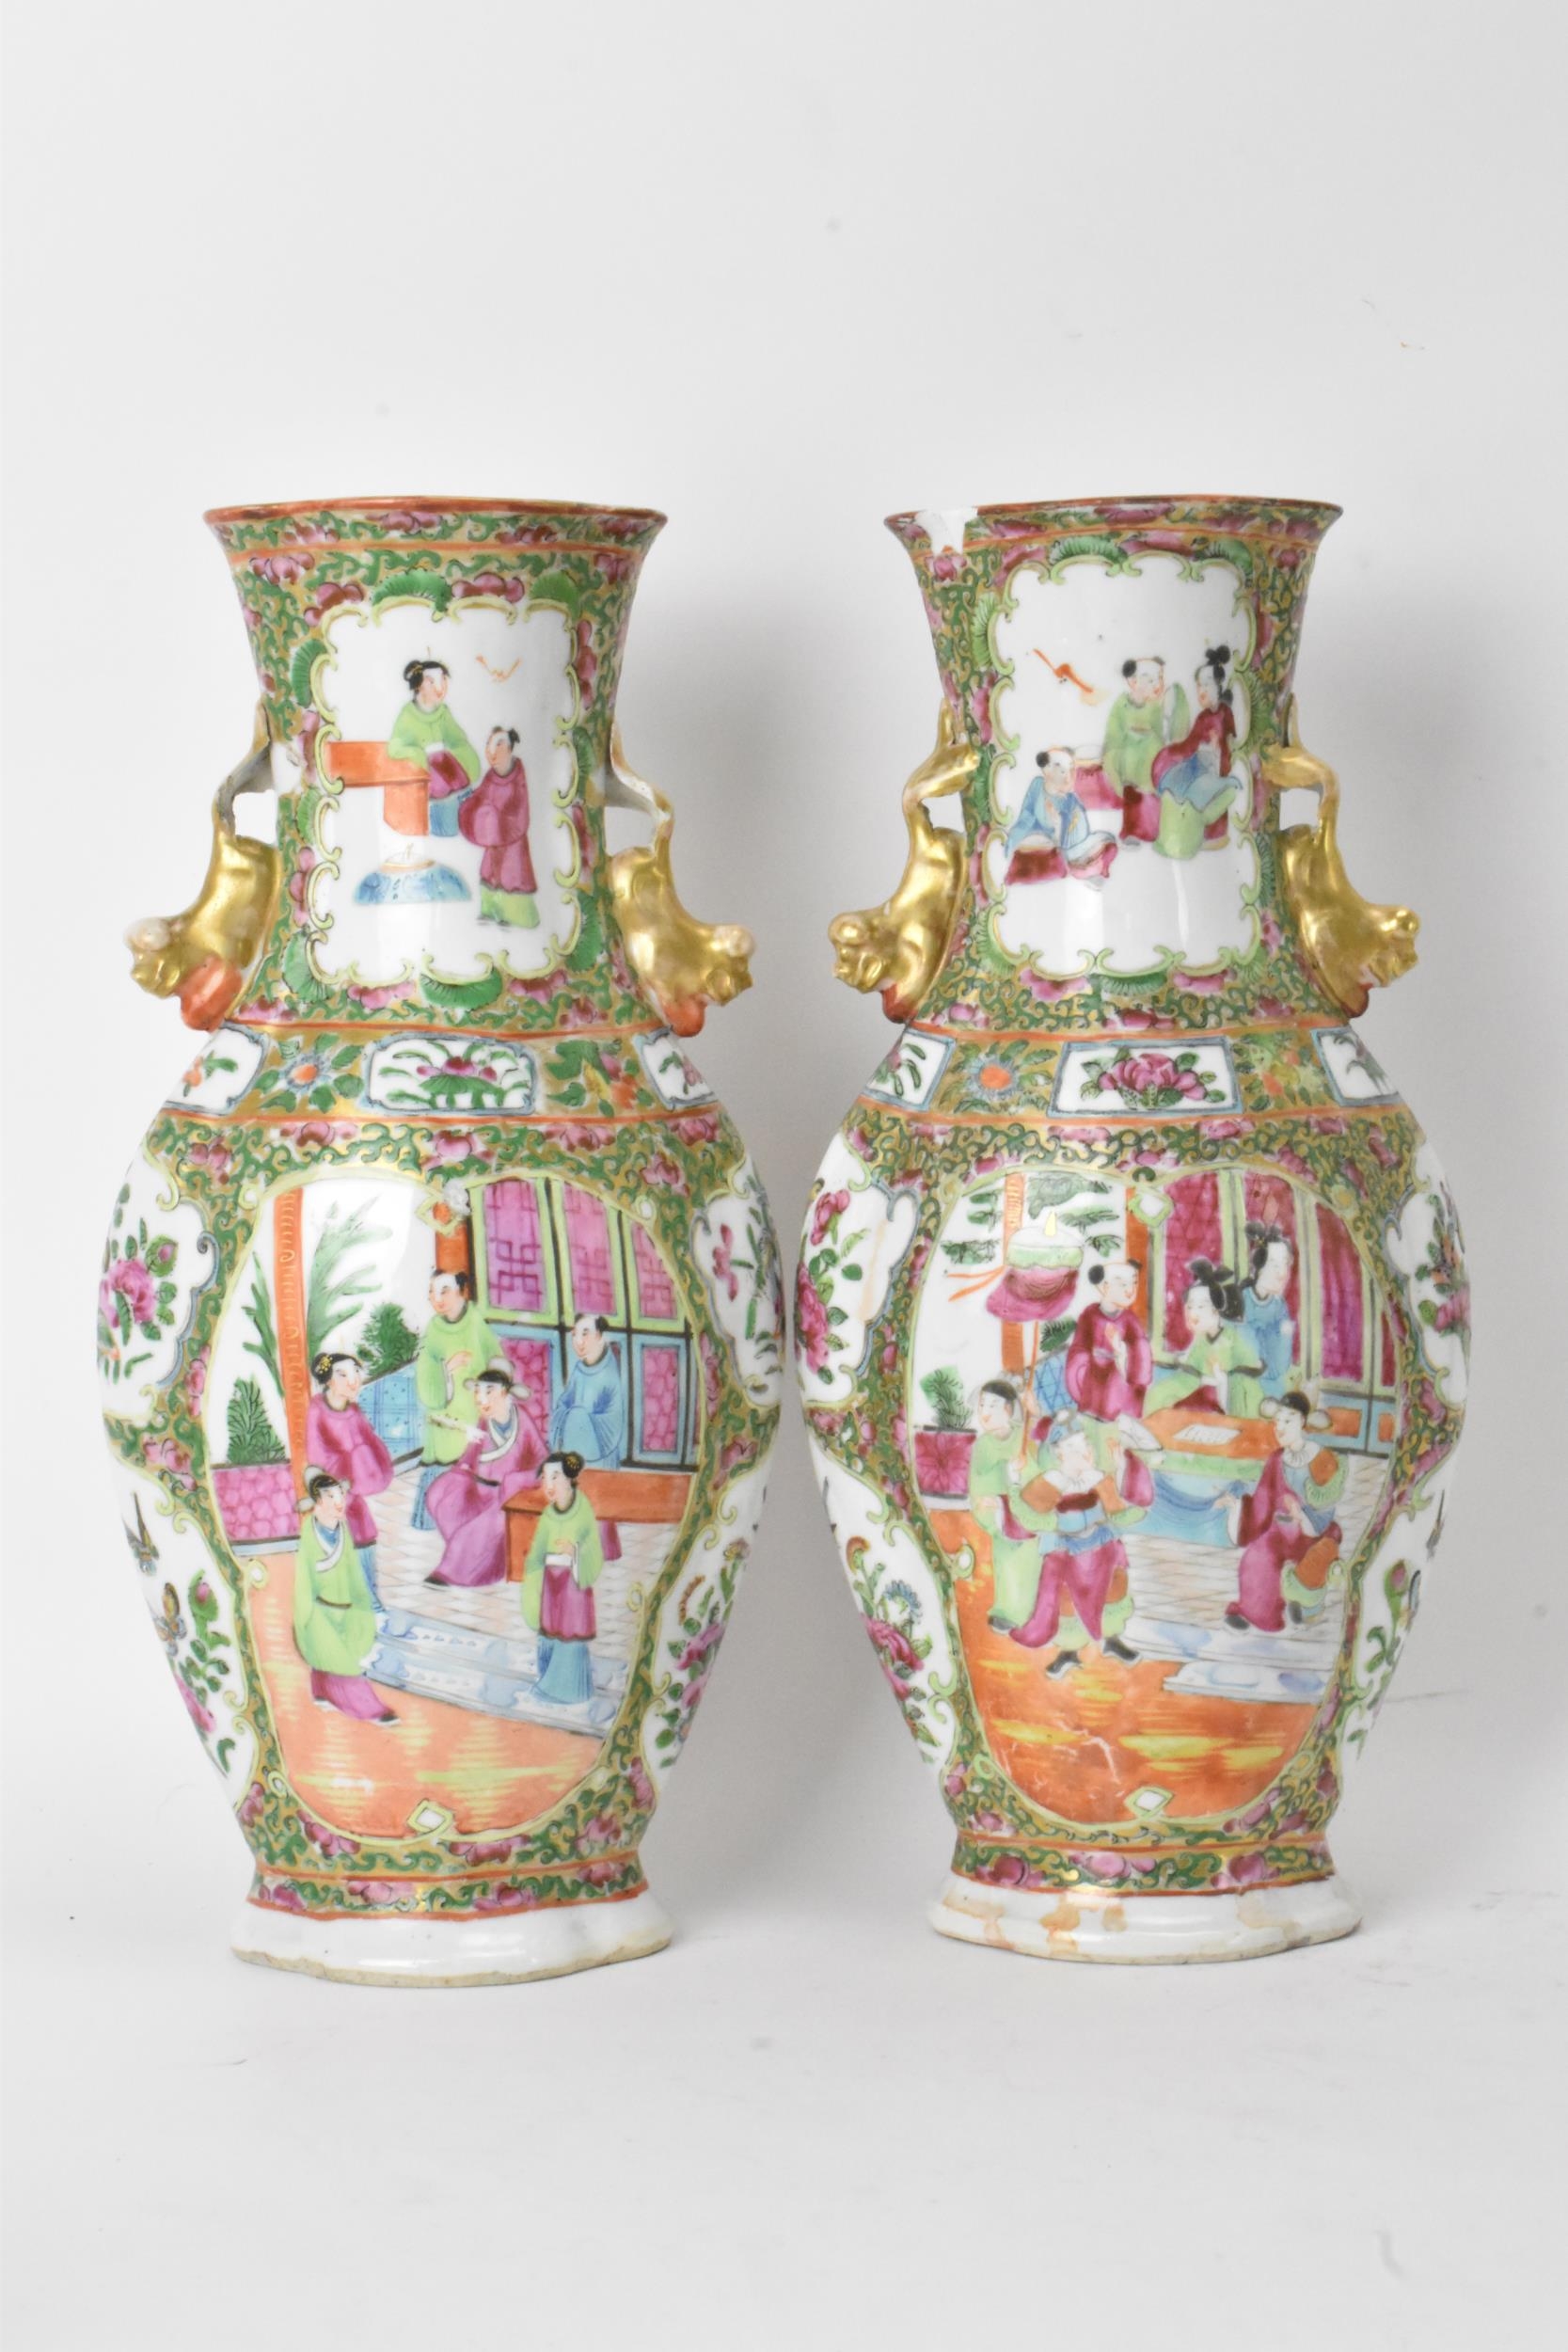 A pair of Chinese export Canton Famille Rose vases, Qing Dynasty, late 19th century, in polychrome - Image 3 of 6